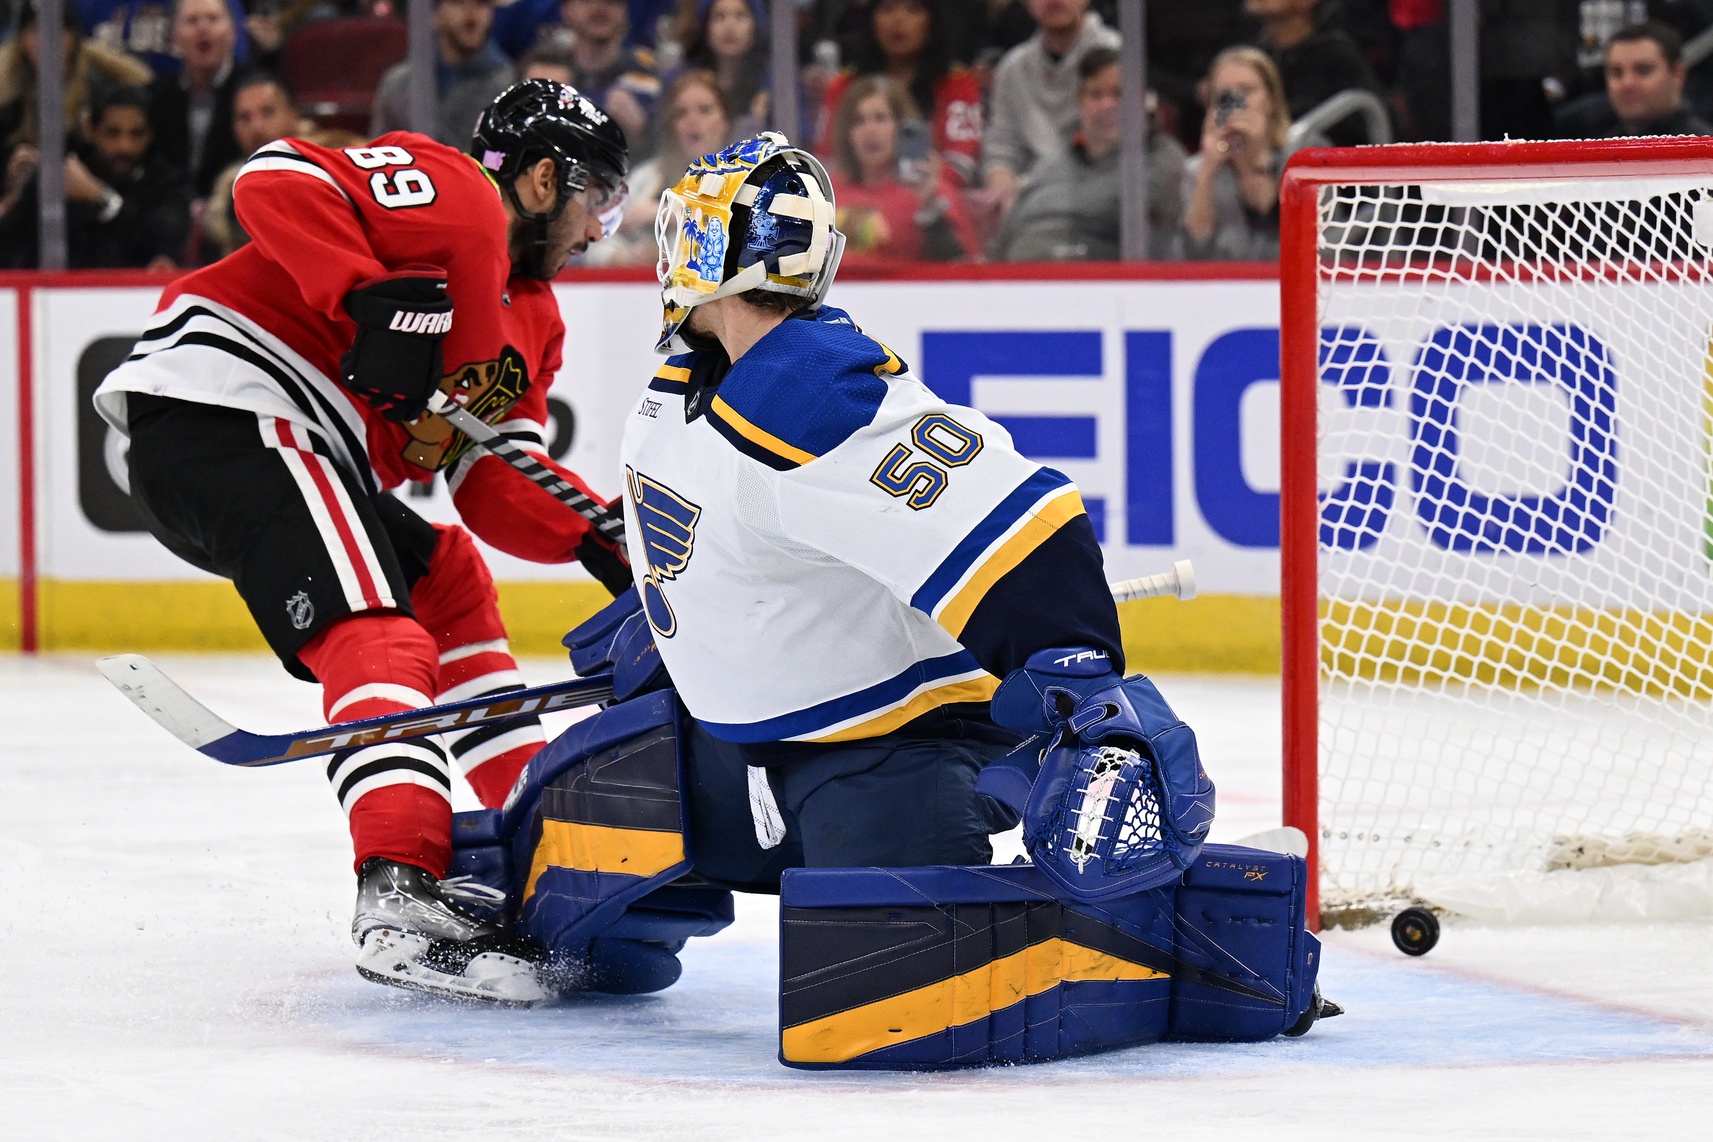 Jordan Binnington: From almost an afterthought to 'the guy' in Blues' net